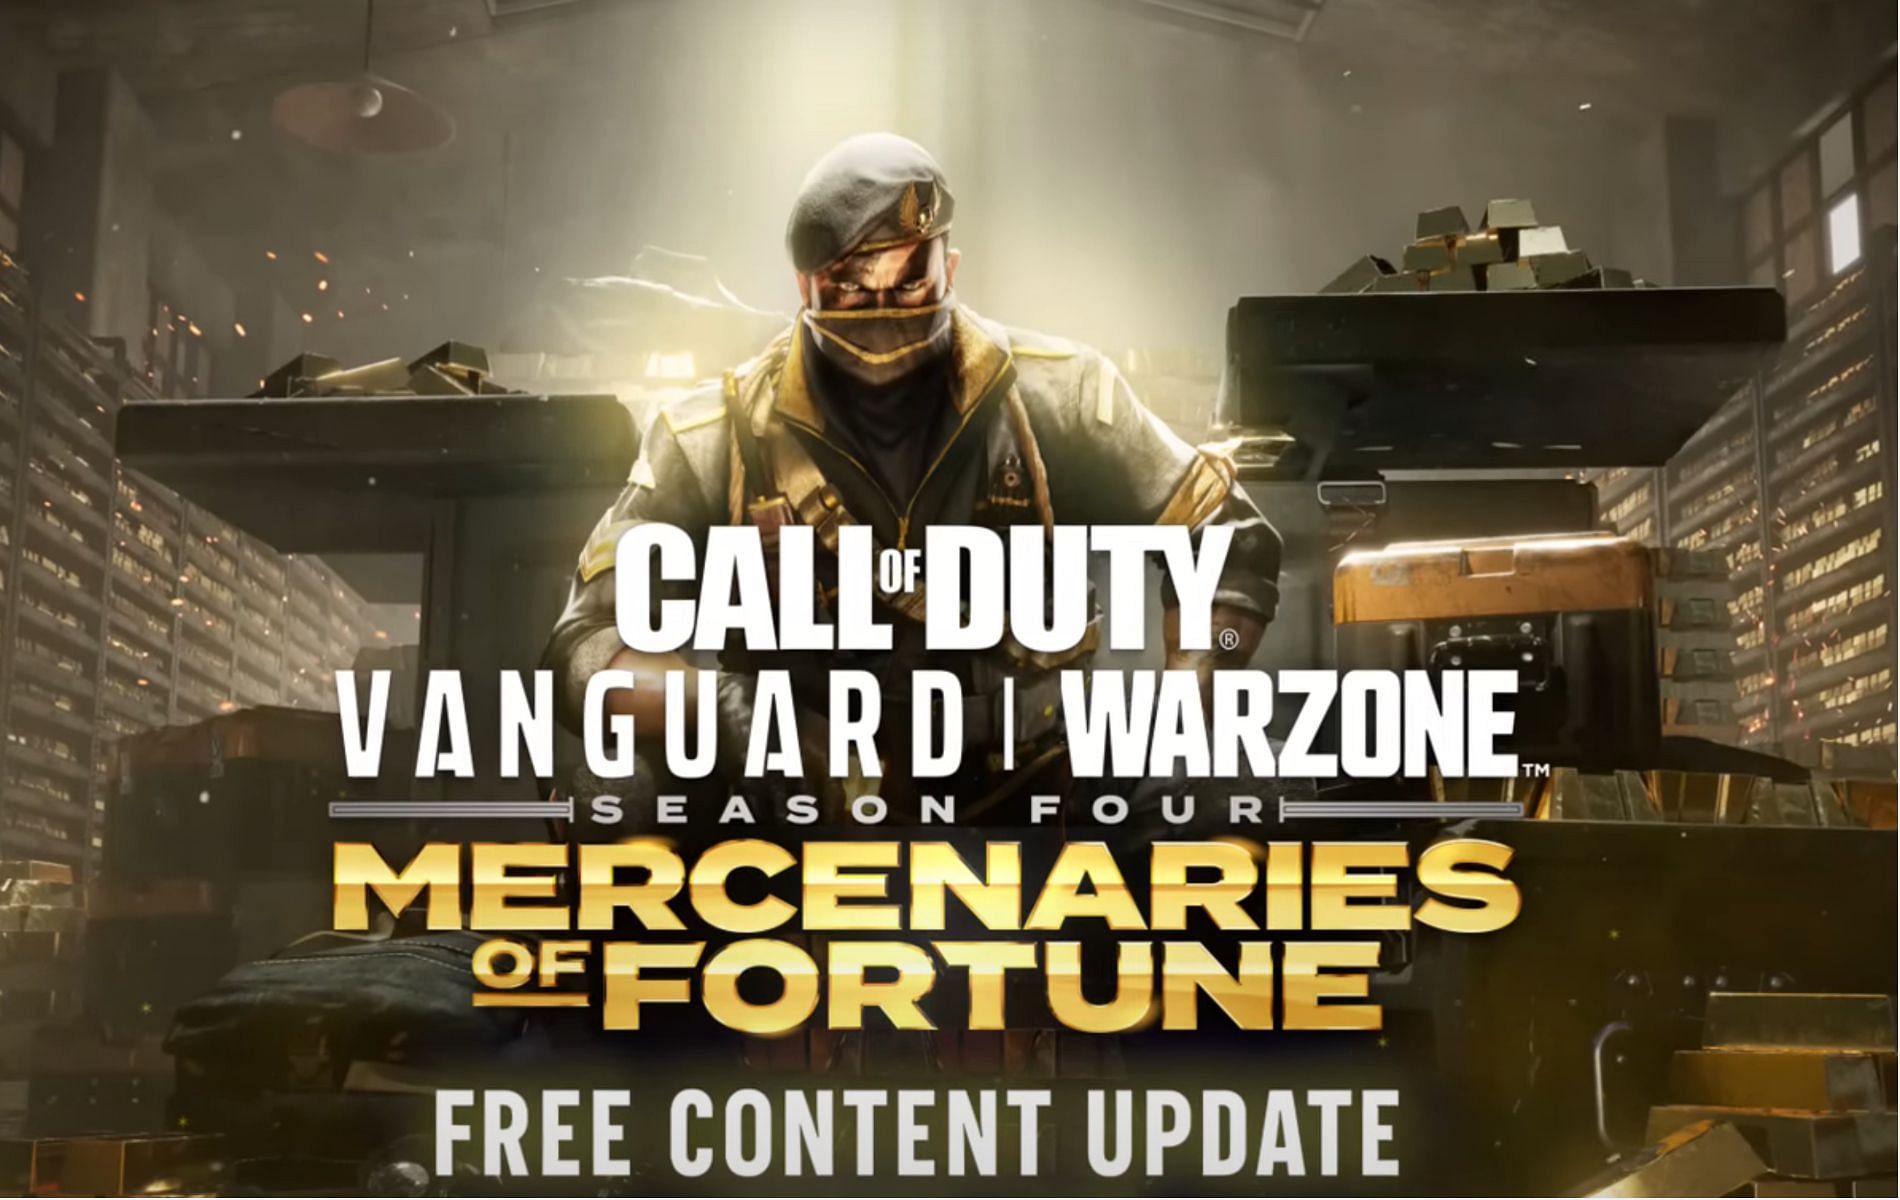 All Call of Duty: Vanguard editions and content - Dot Esports